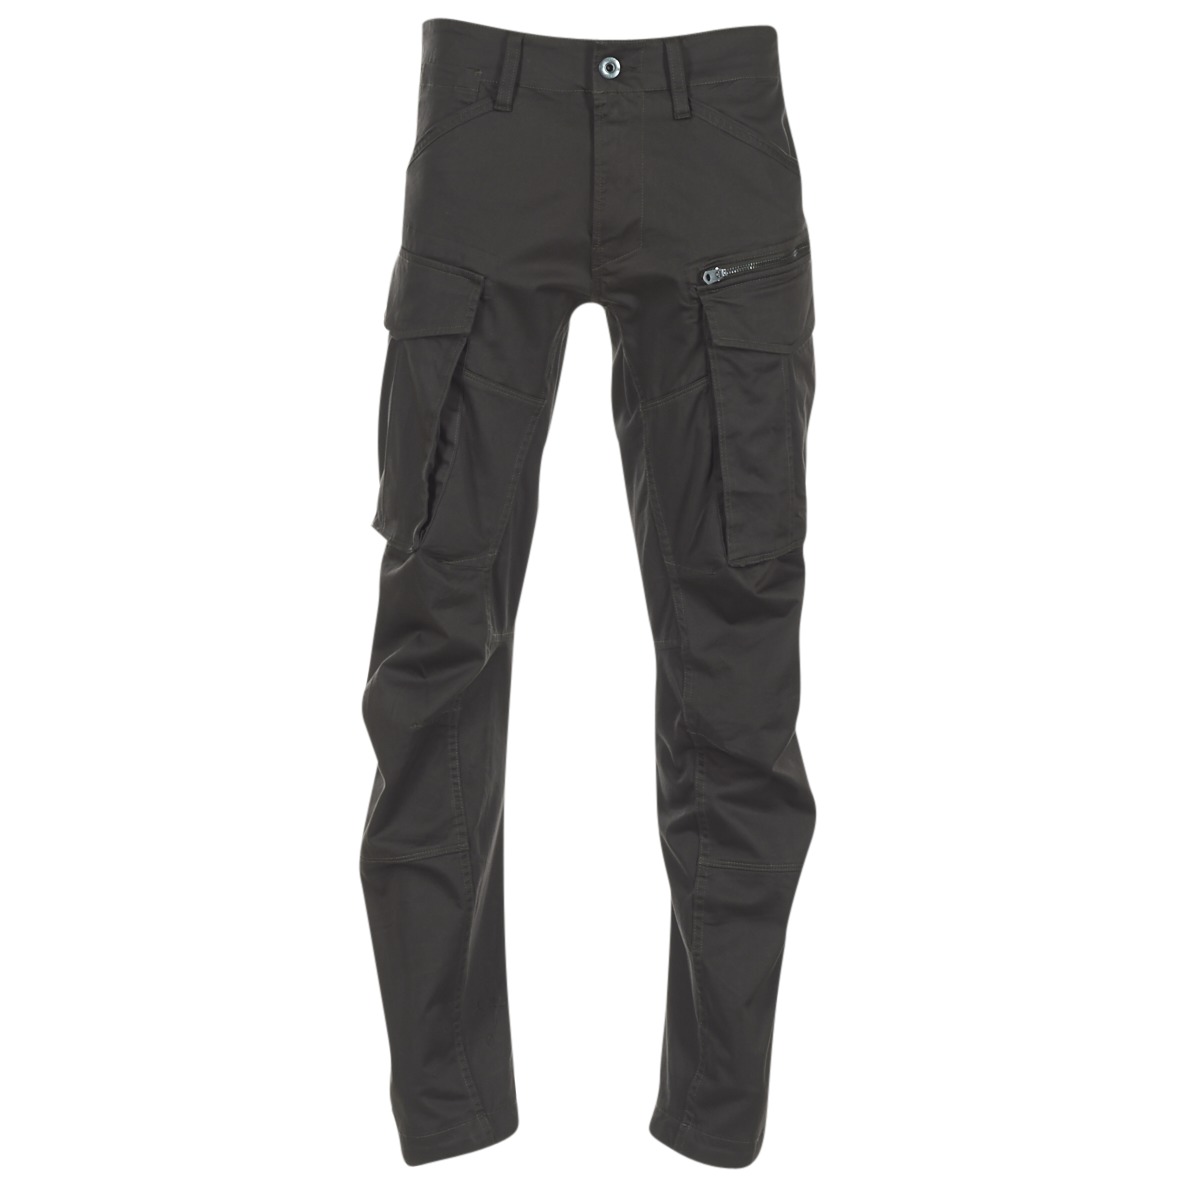 g-star raw  rovic zip 3d tapered  men's trousers in grey